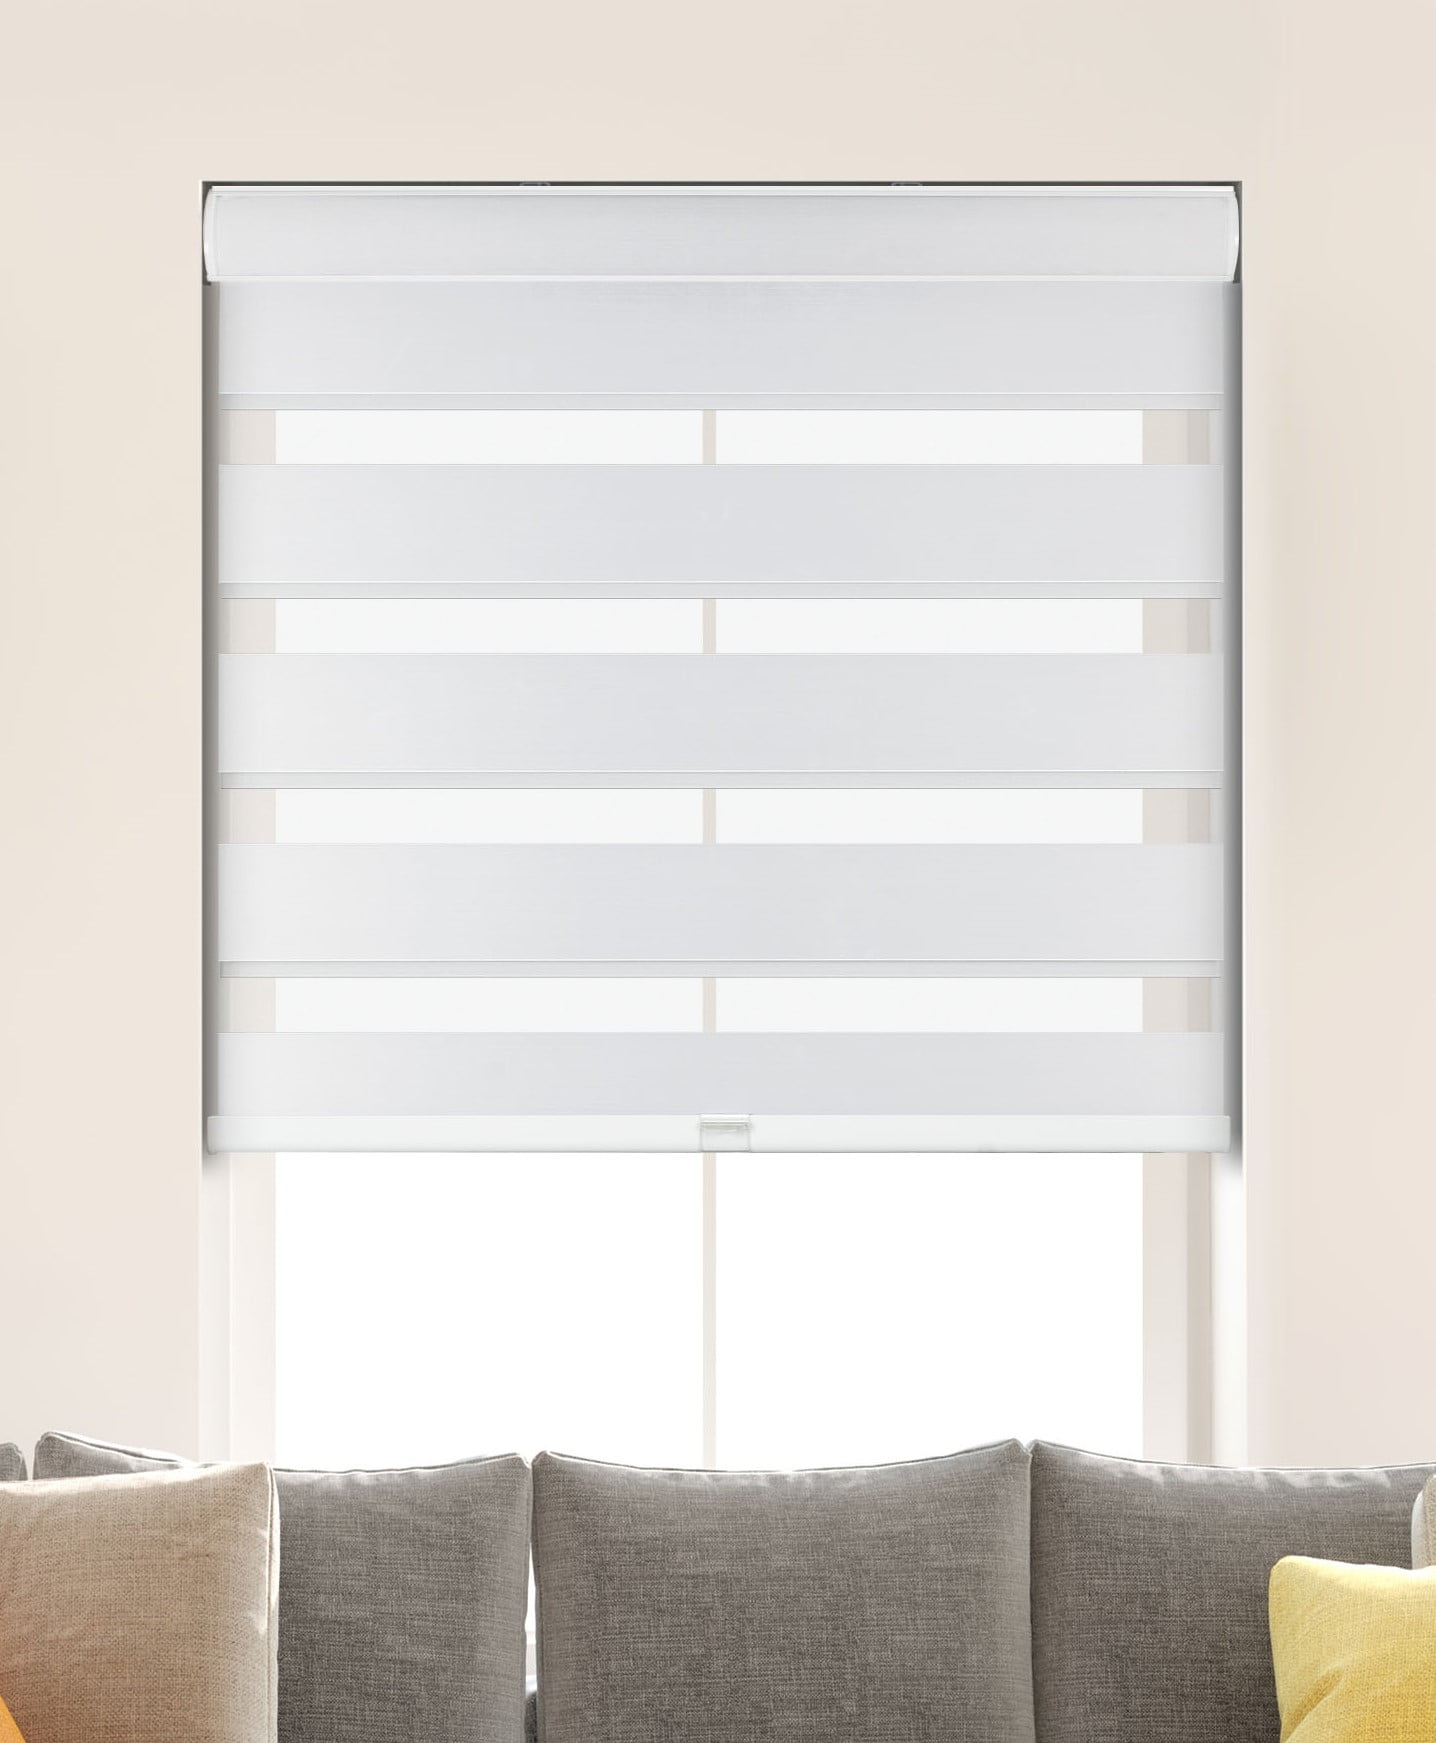 Sheer or Privacy Cordless Zebra Roller Blinds Sheer Shades White 46"W X 72"H 